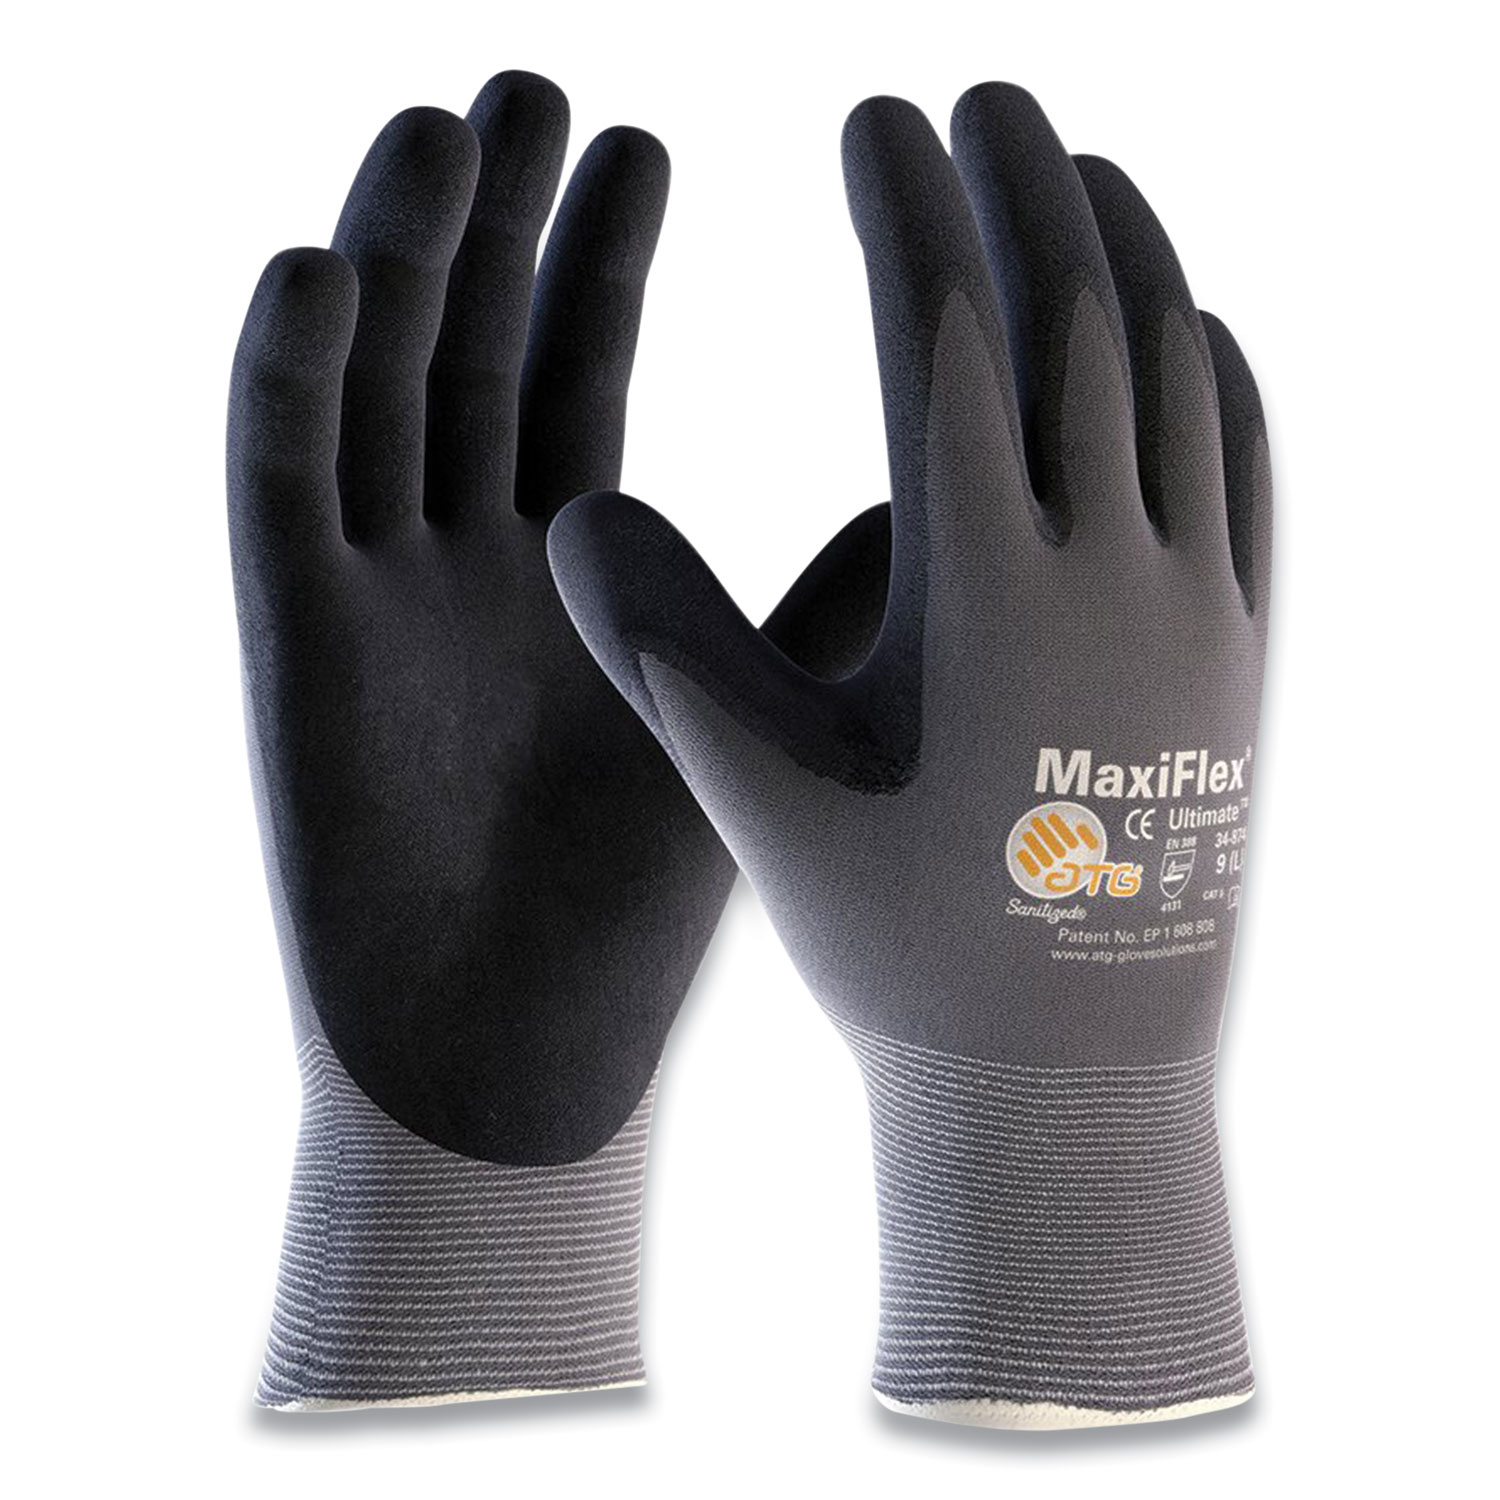  MaxiFlex 34-874/XL Ultimate Seamless Knit Nylon Gloves, Nitrile Coated MicroFoam Grip on Palm and Fingers, X-Large, Gray, 12 Pairs (PID179946) 